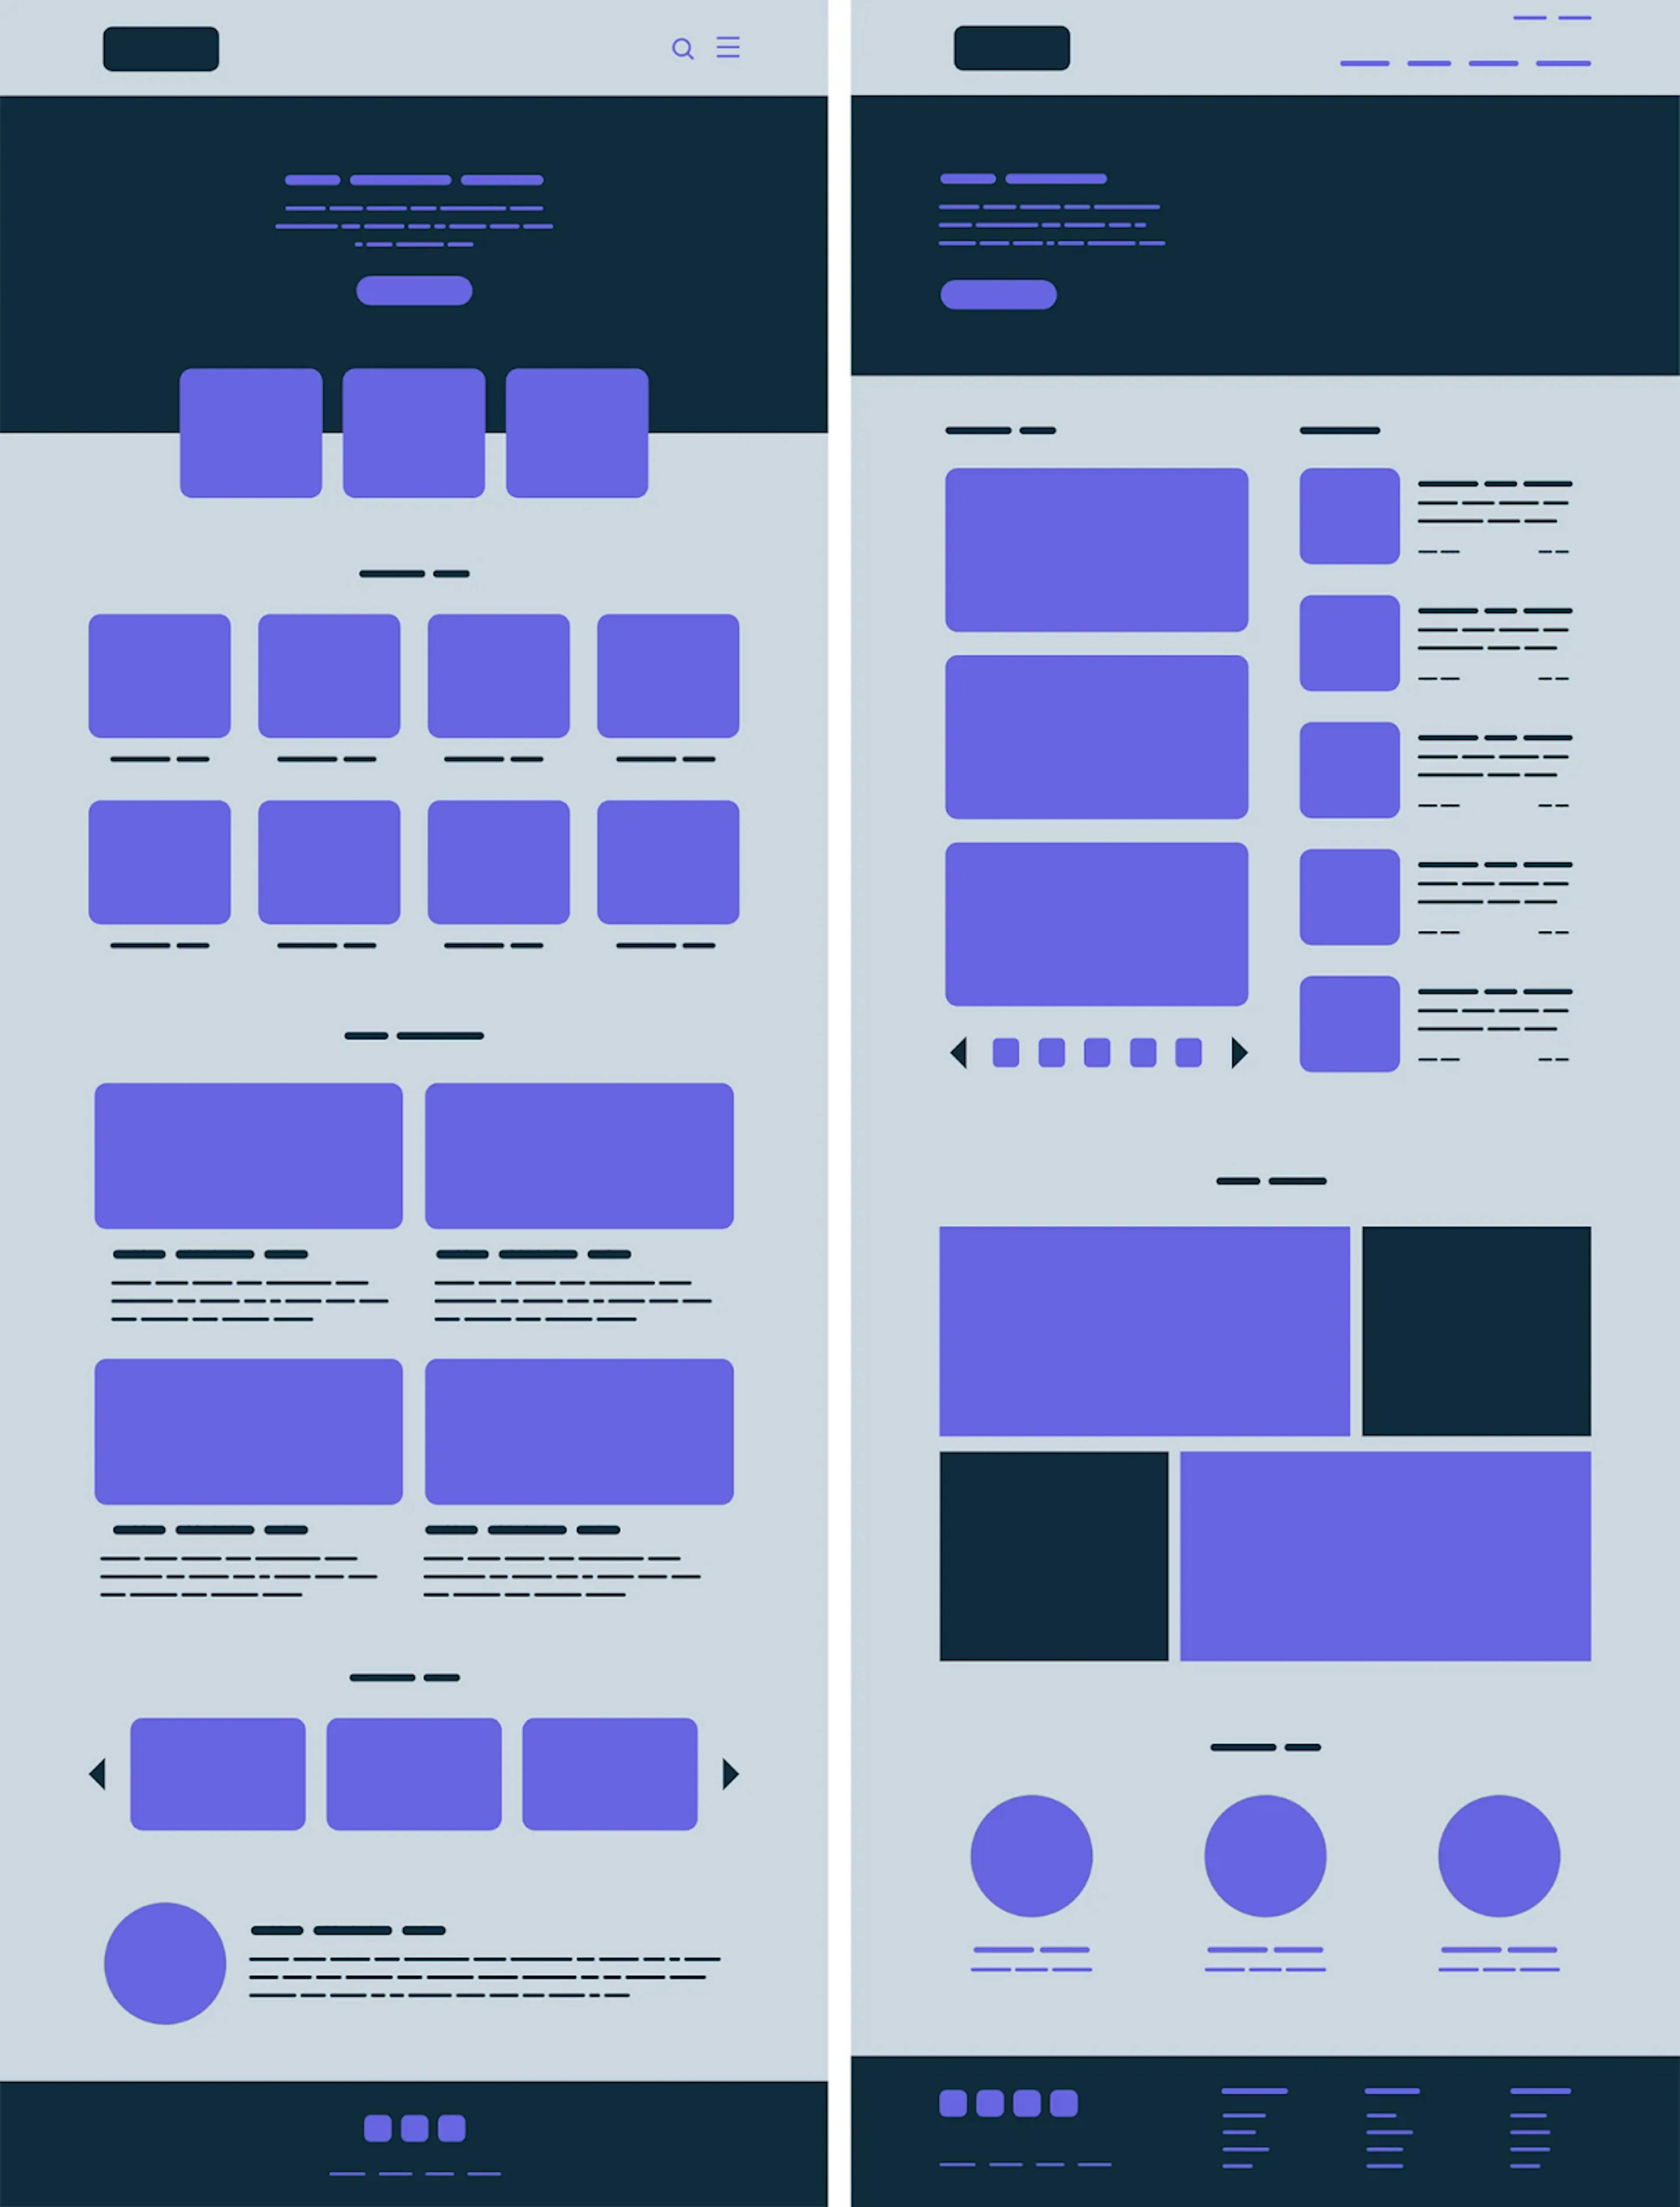 Examples of different layouts using element groupings to guide user attention